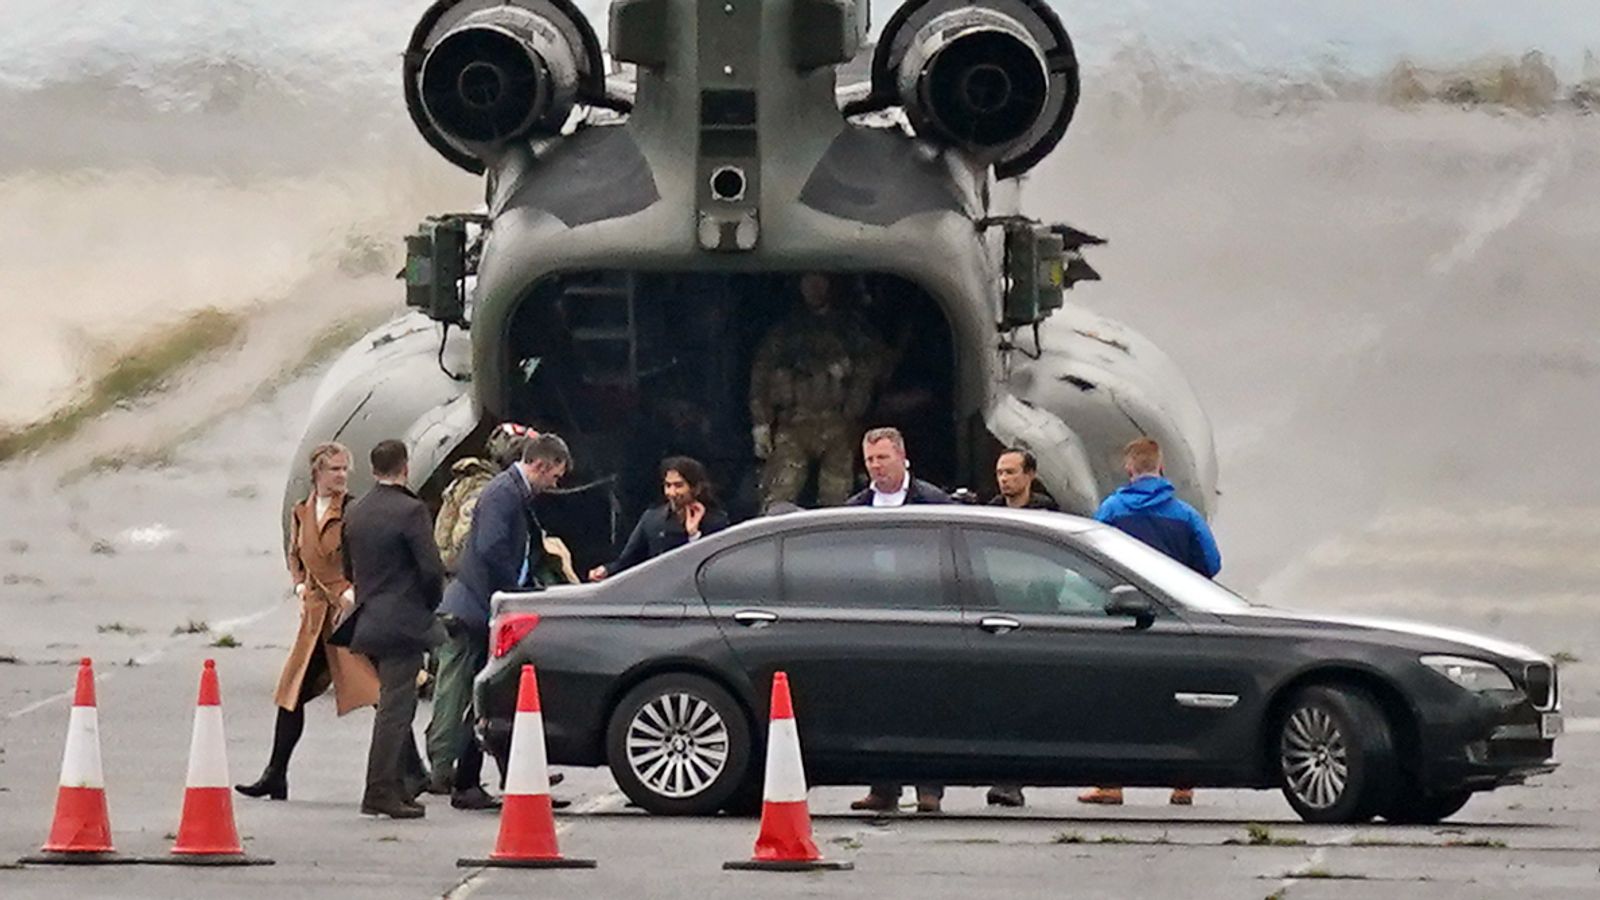 Suella Braverman avoids press questions after travelling to Manston in military helicopter